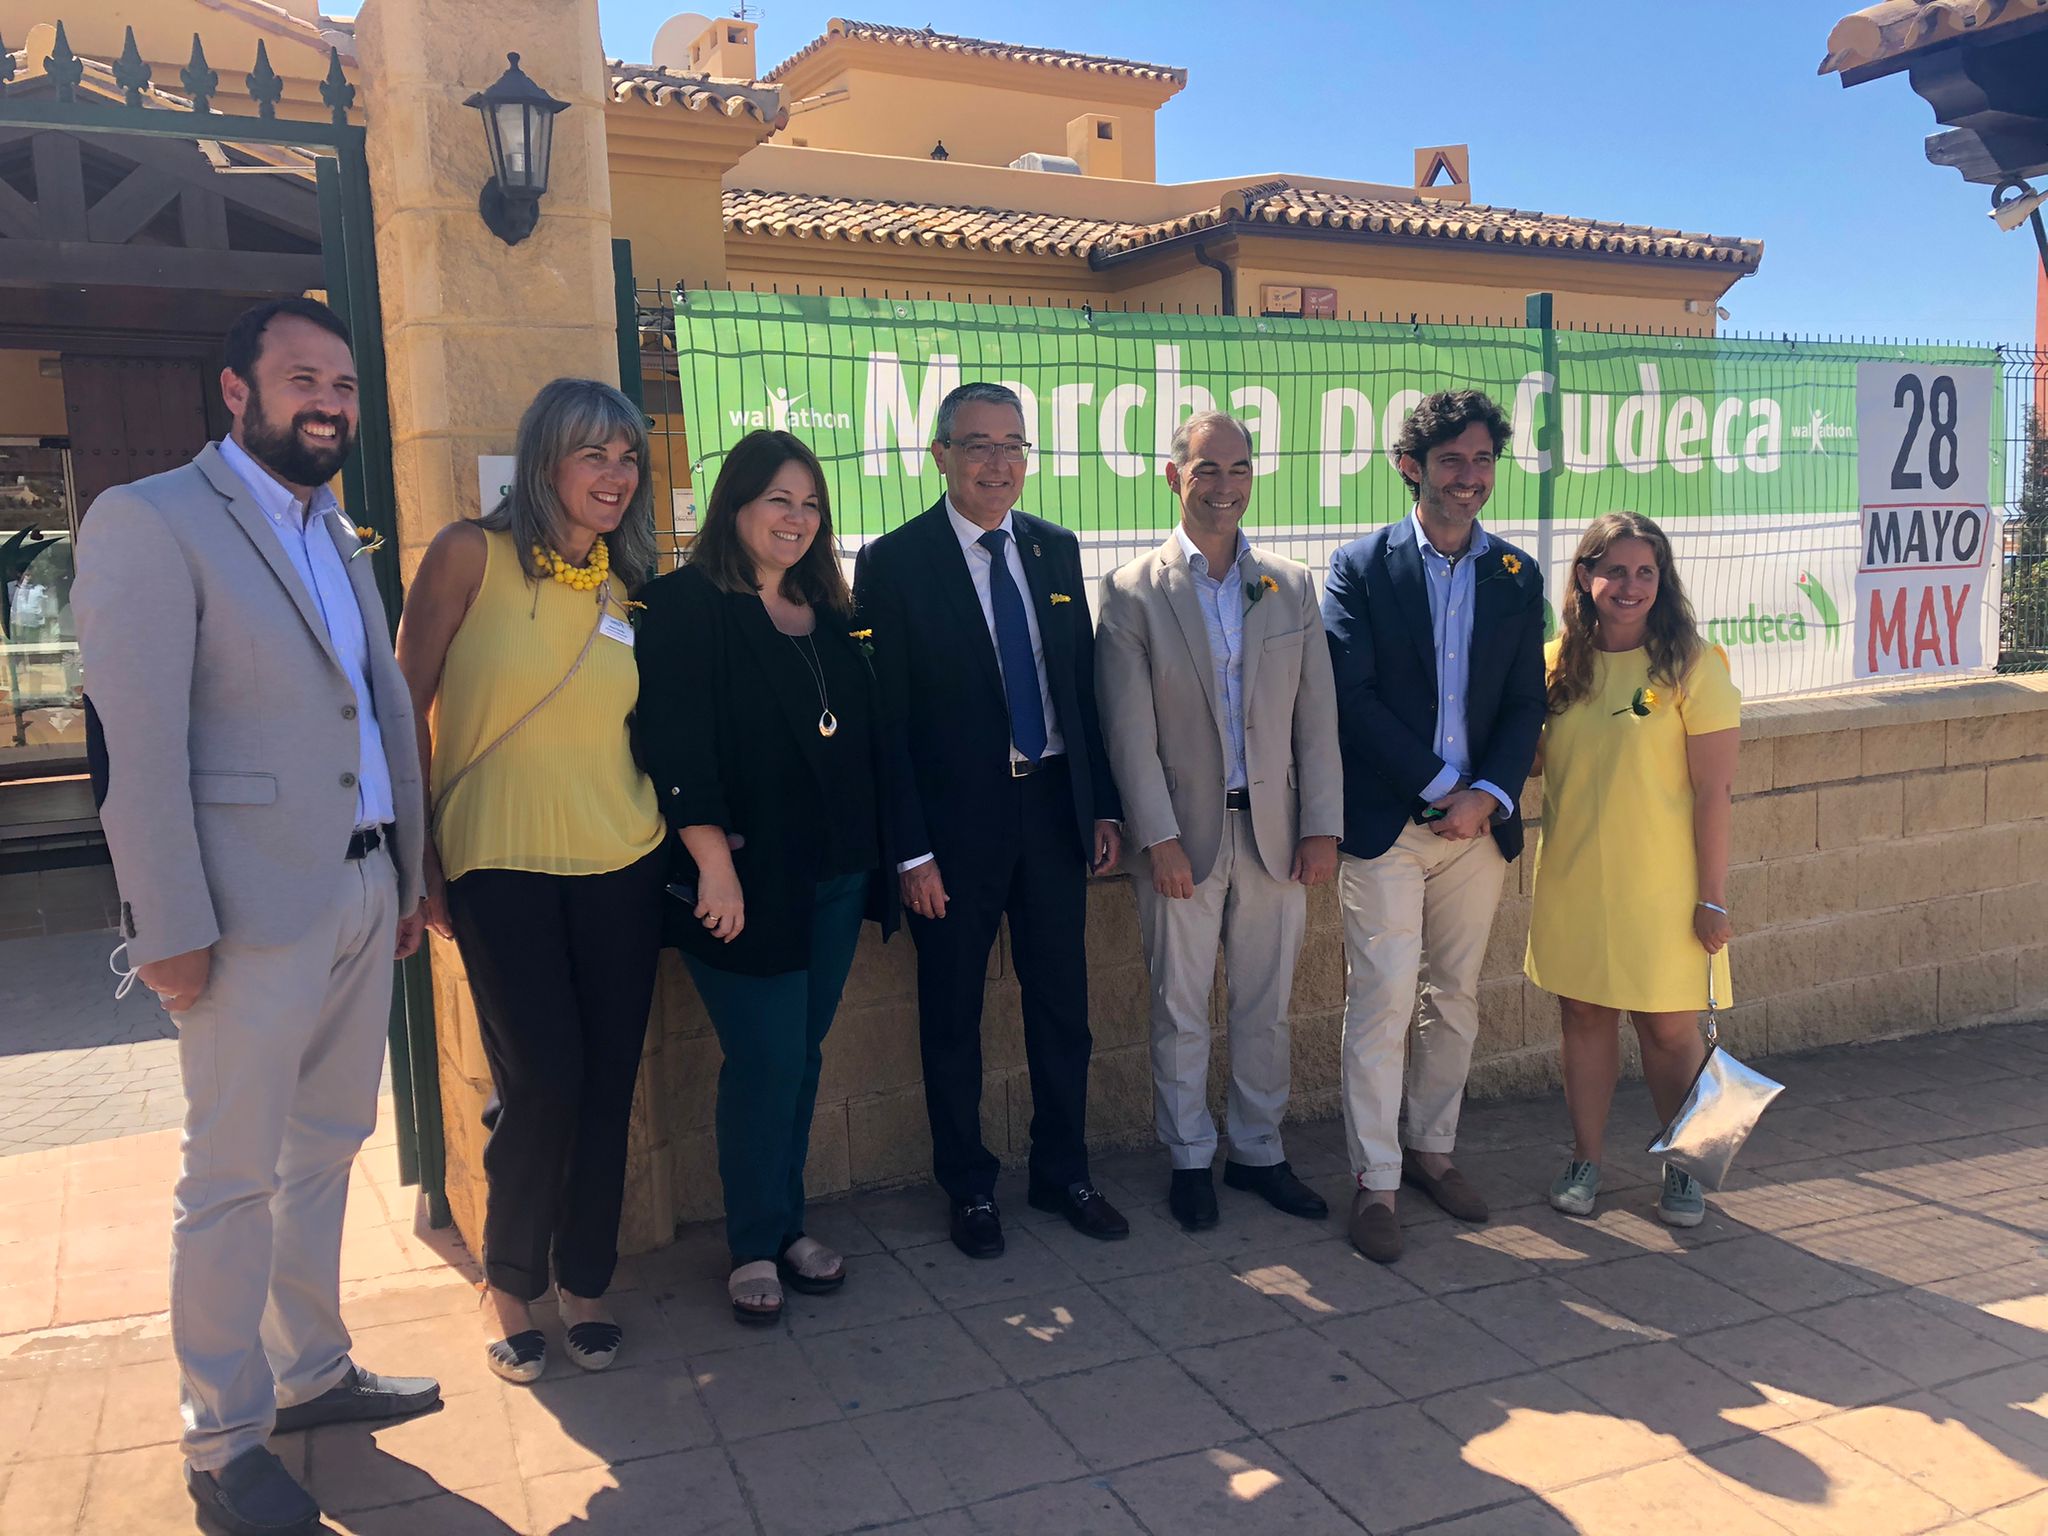 Visit of the President of the Provincial Council of Malaga